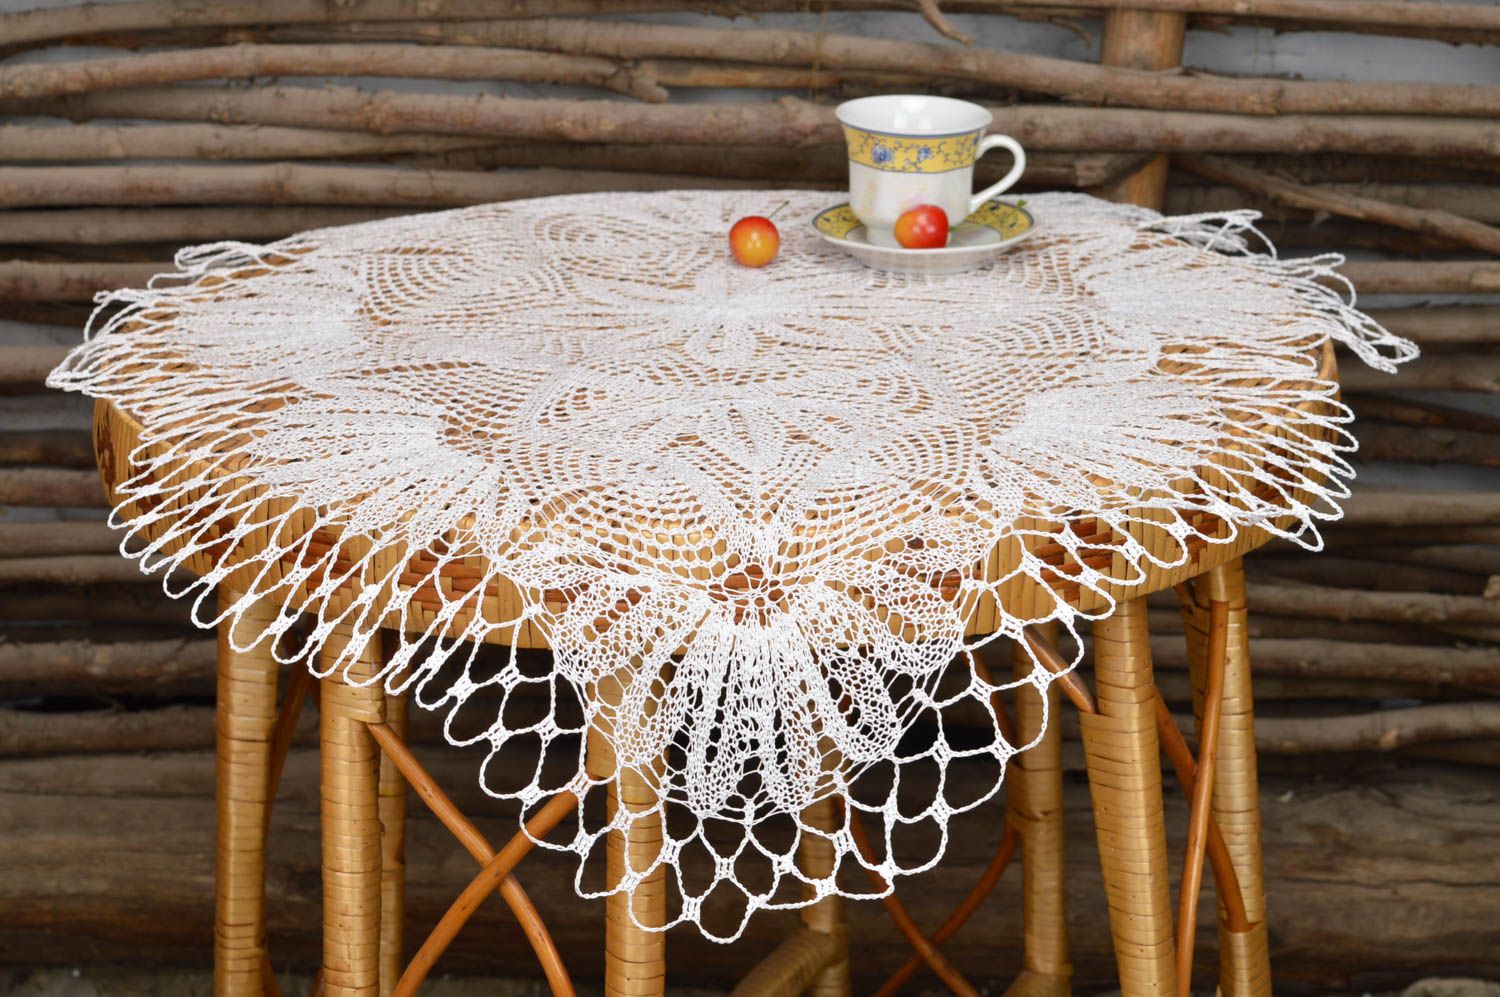 Snow white handmade decorative oval table napkin crocheted of cotton threads photo 1